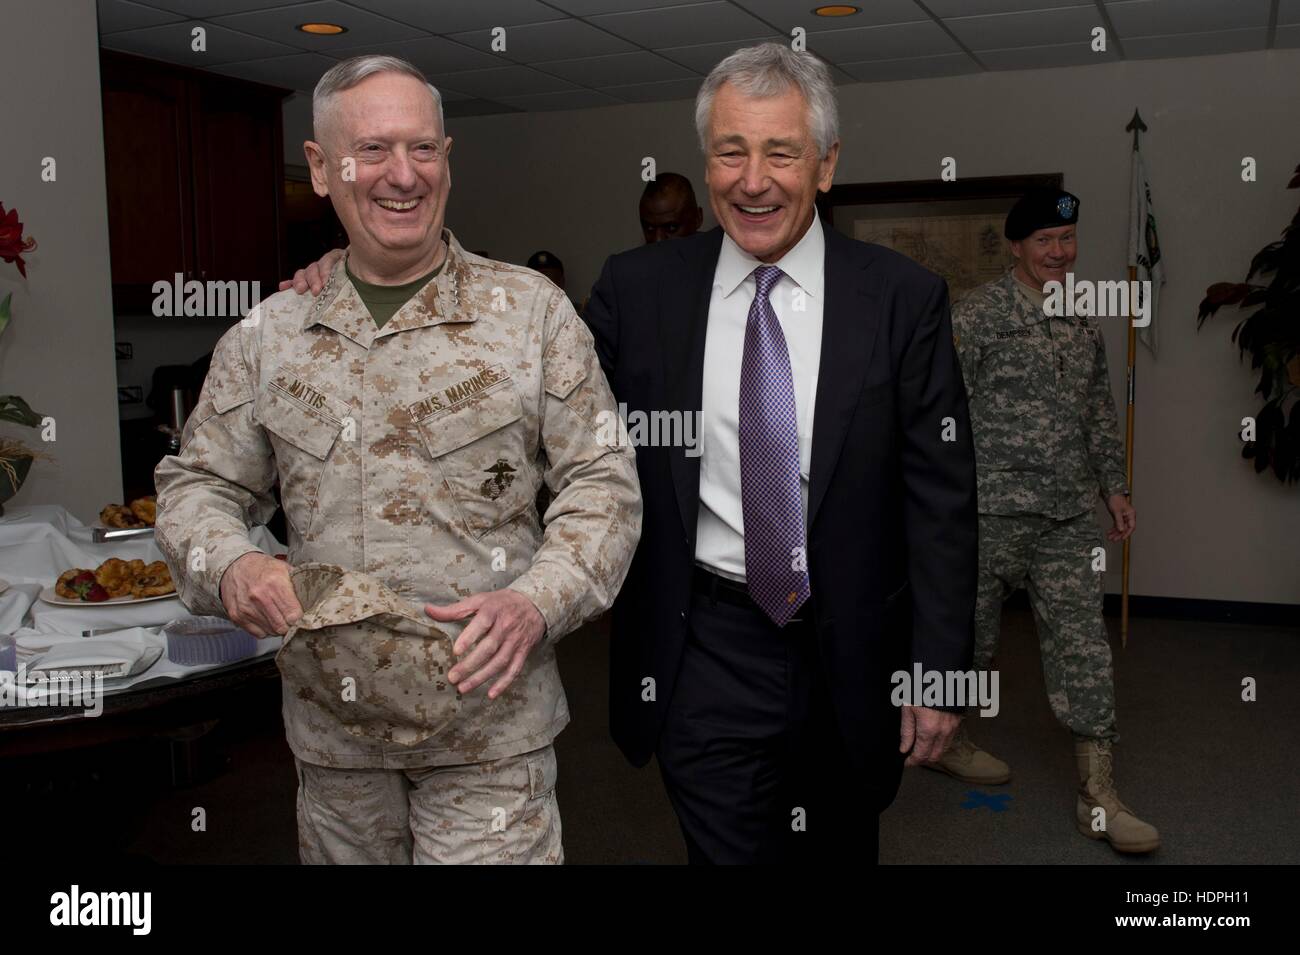 U.S. Marine Corps General James Mattis (left) shares a laugh with Secretary of Defense Chuck Hagel after the U.S. Central Command change-of-command ceremony at the MacDill Air Force Base March 22, 2013 in Tampa, Florida. Stock Photo